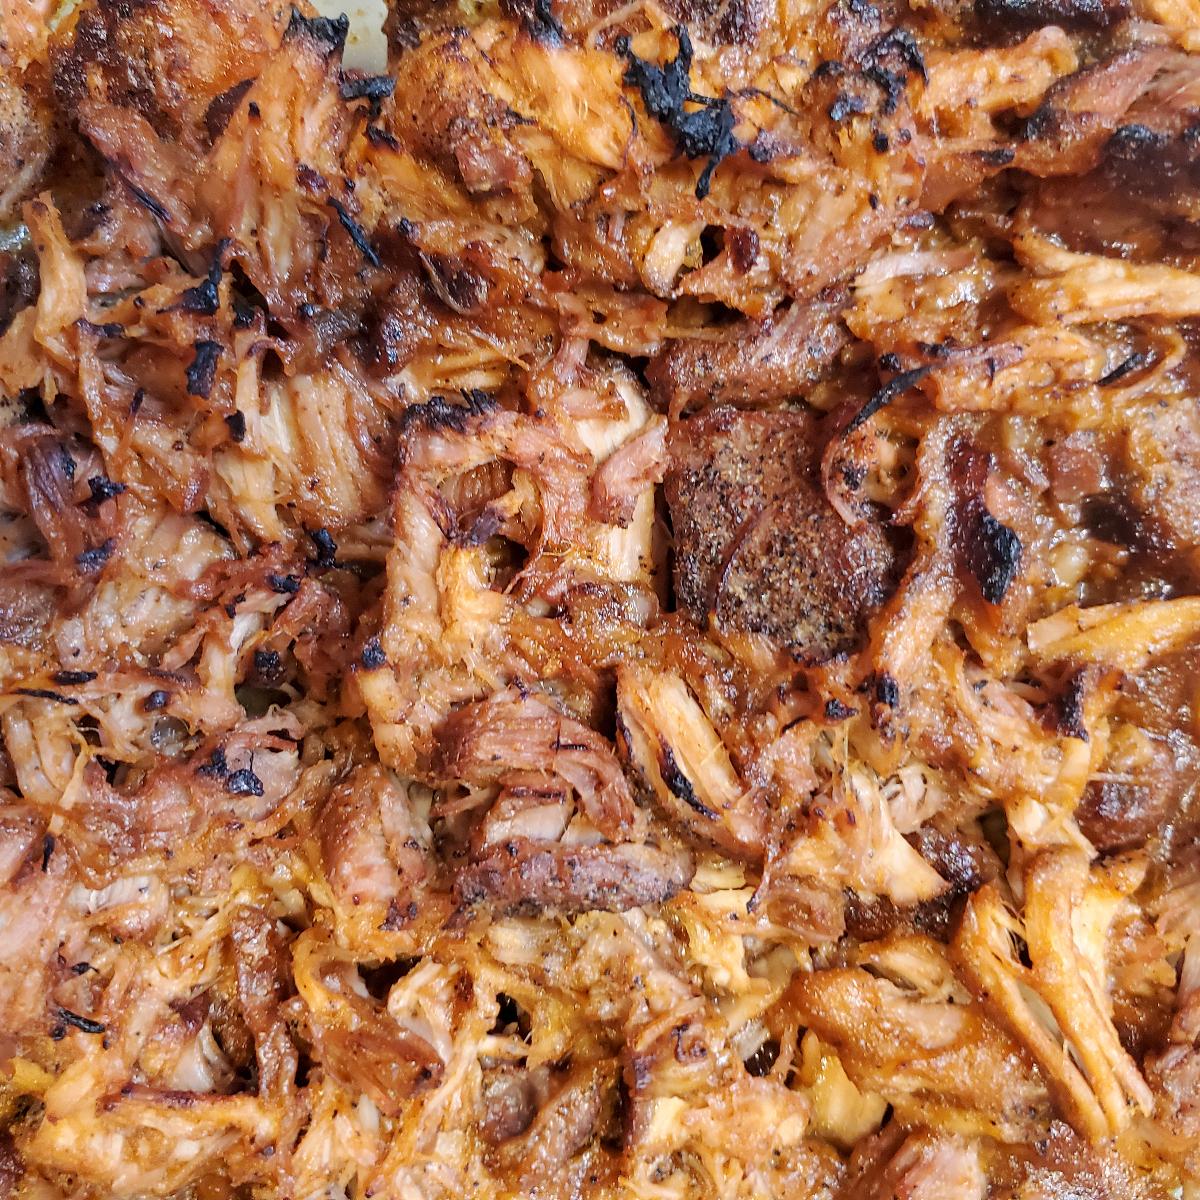 Pulled pork in the oven recipe from cleveland cooking